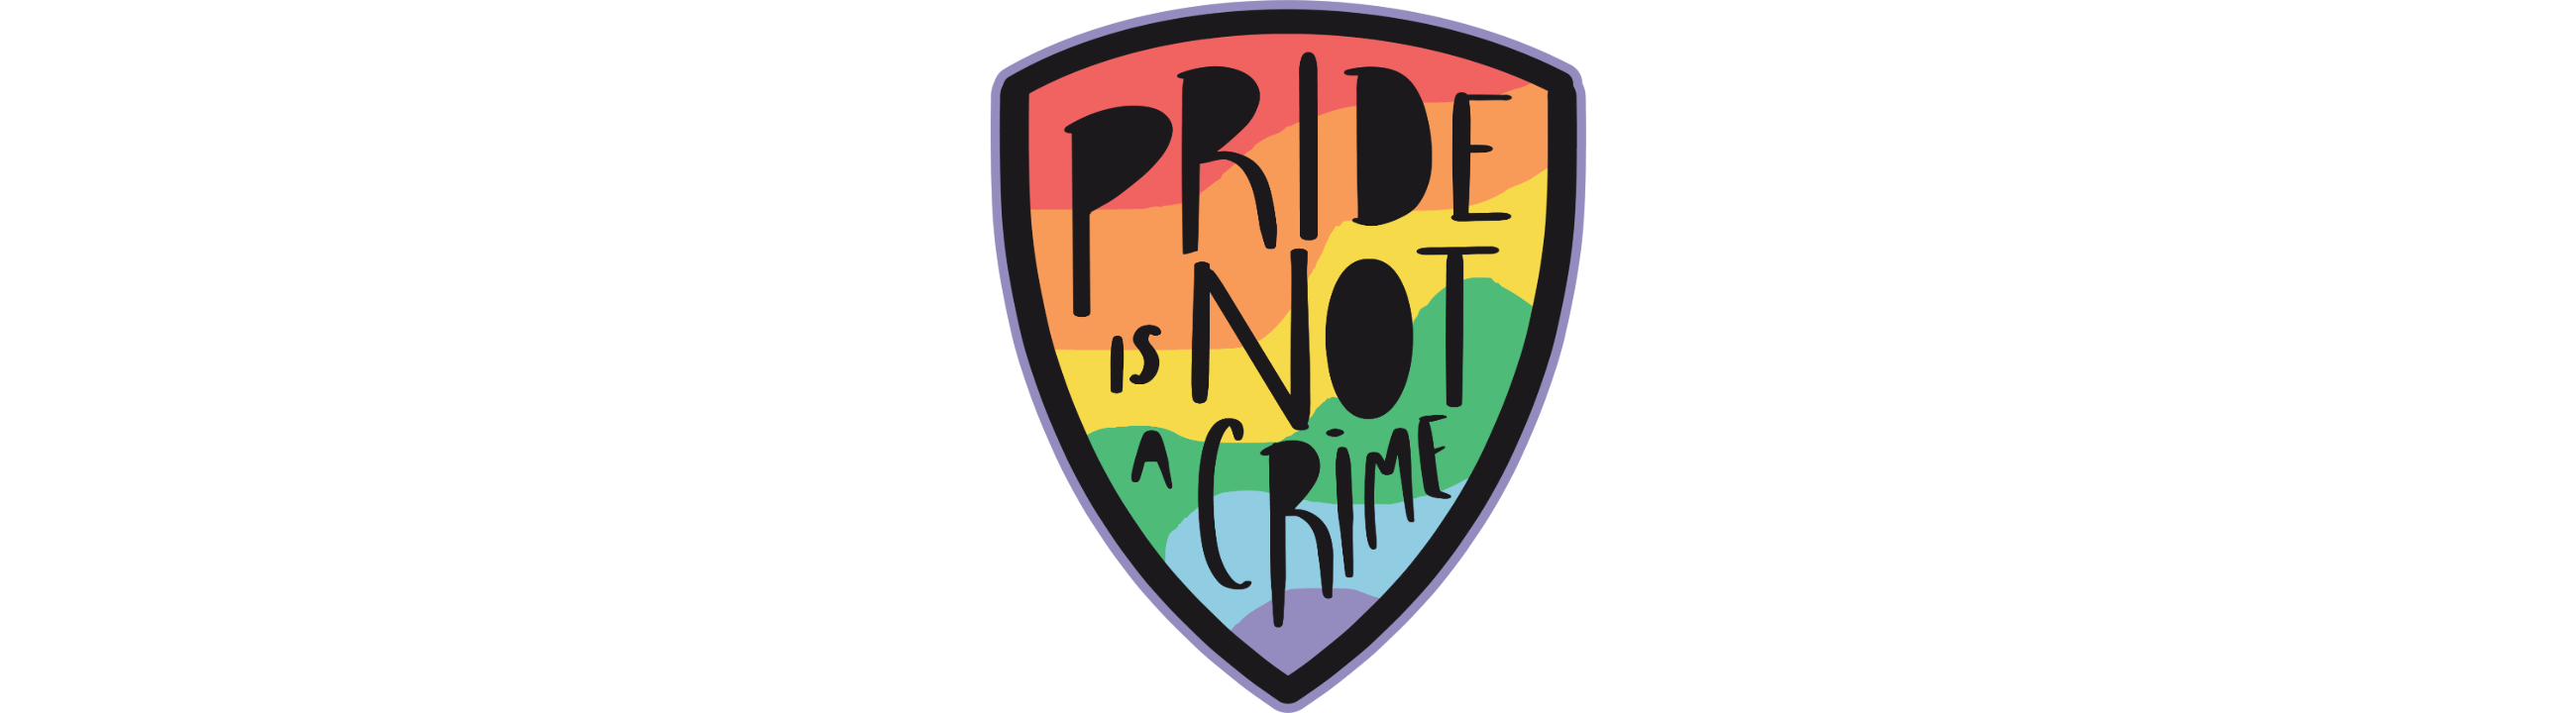 Pride is not a Crime